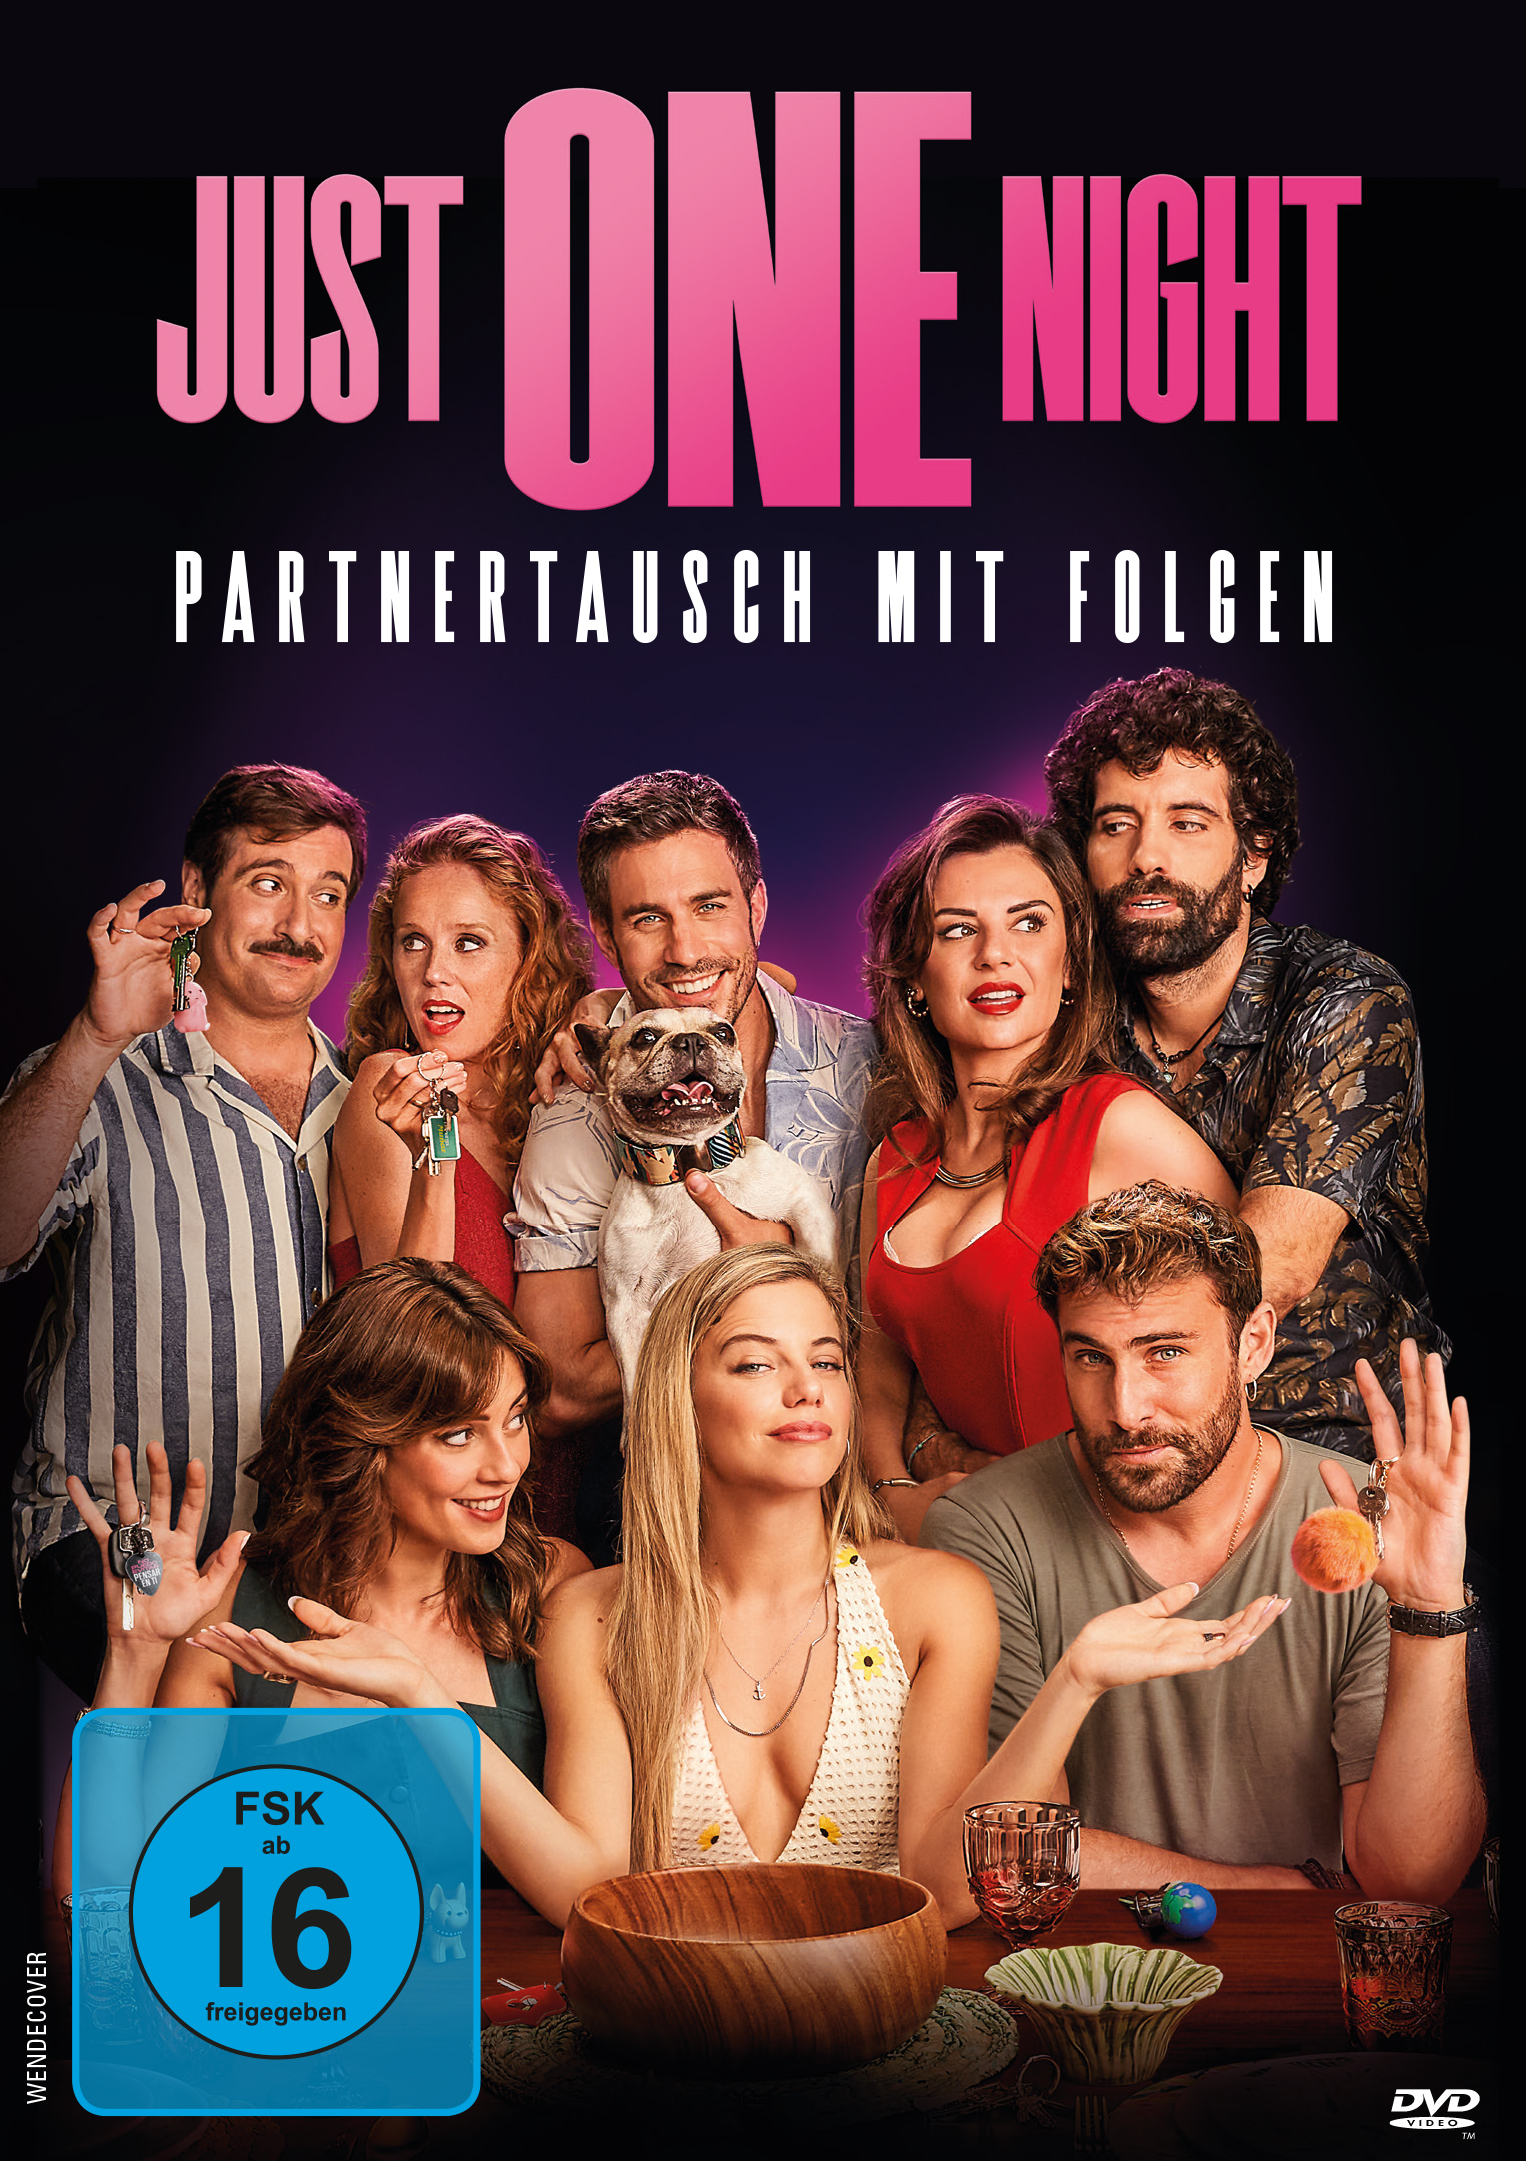 Just one Night aka The Key Game_DVD_inl_FSK16.indd